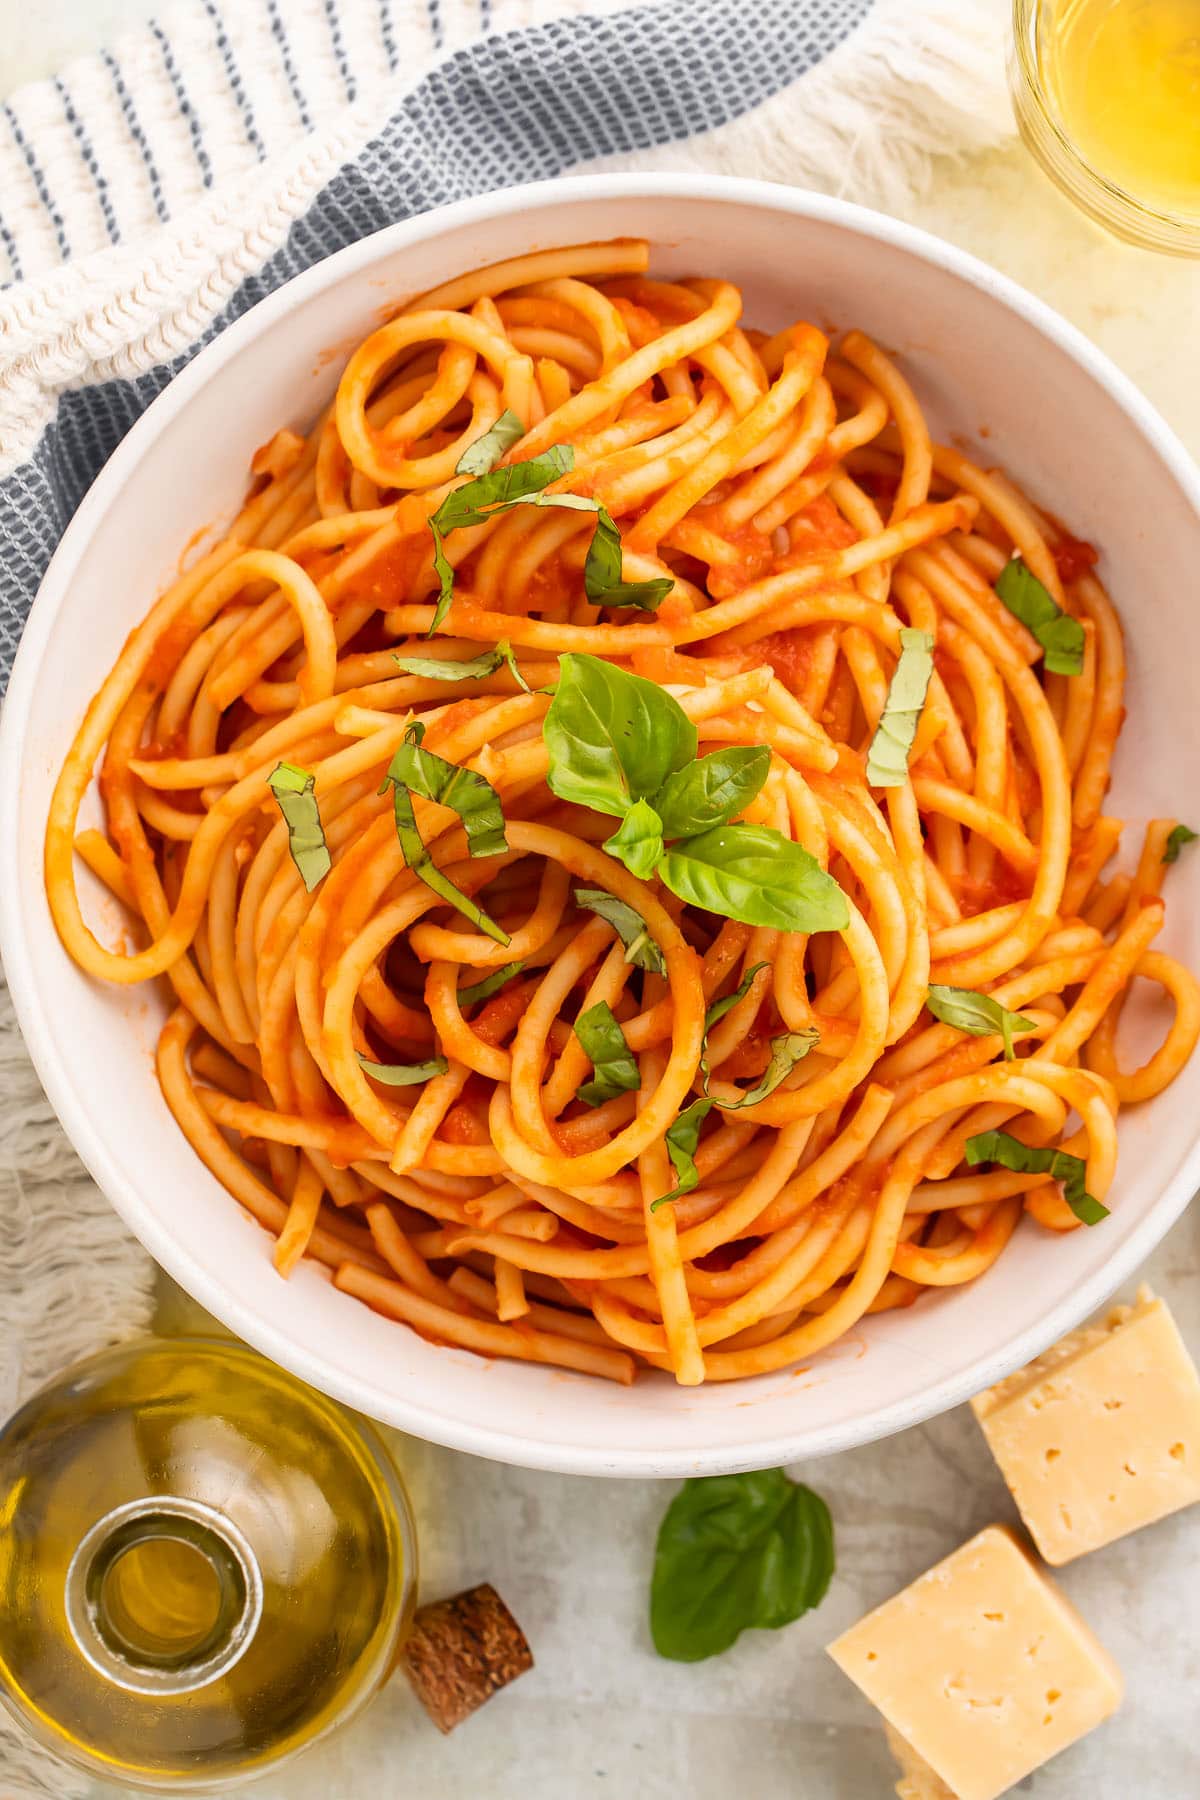 Overhead view of a white bowl of spaghetti swirled with red pomodoro sauce and topped with fresh basil leaves.